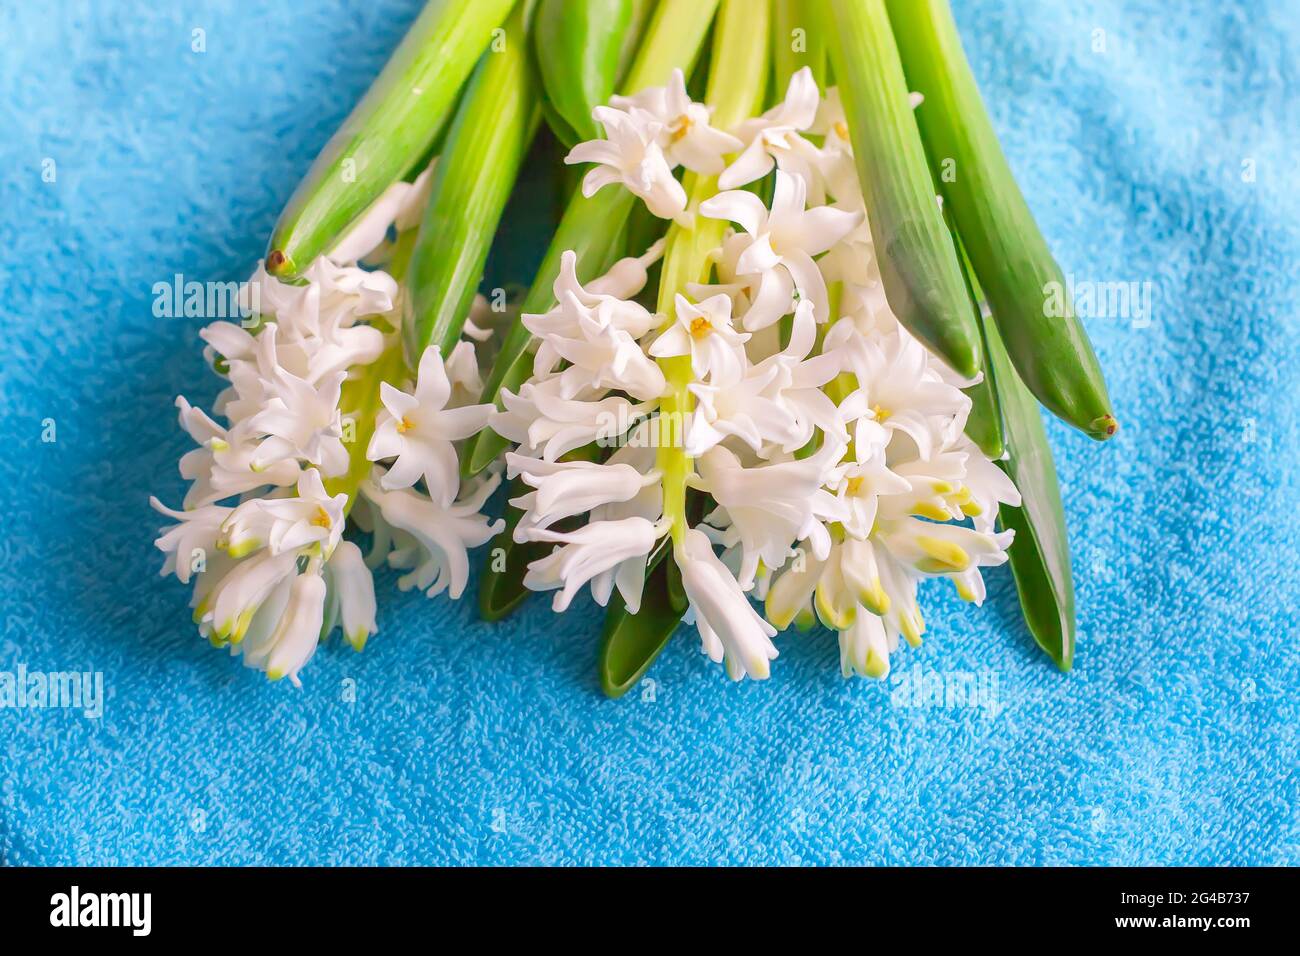 Spring white hyacinth flowers blooming at springtime. Stock Photo